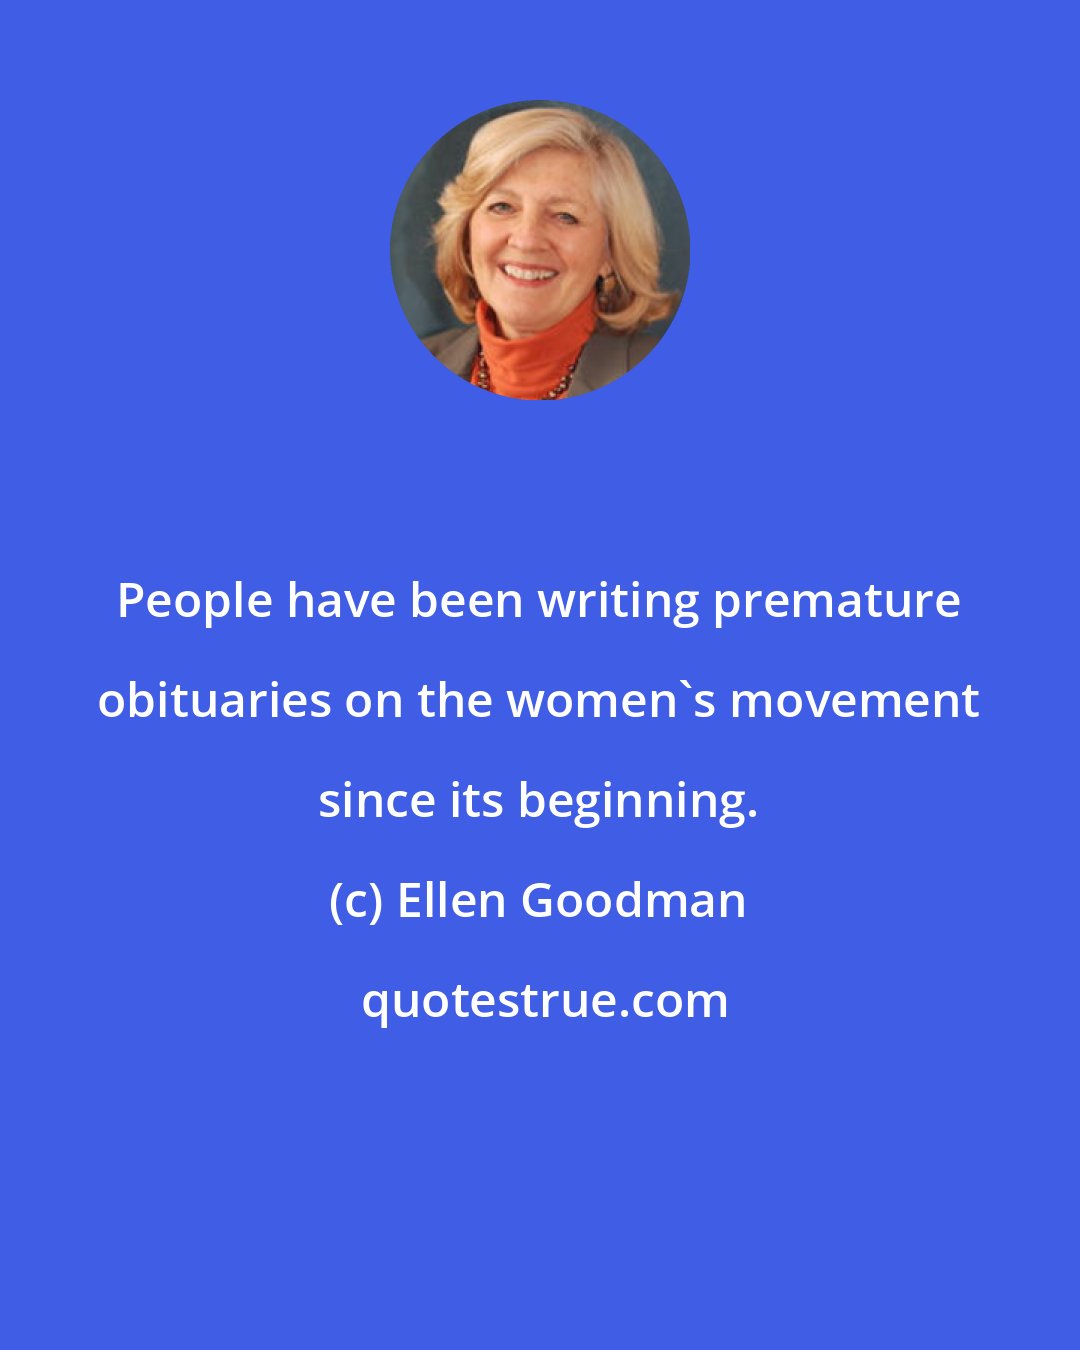 Ellen Goodman: People have been writing premature obituaries on the women's movement since its beginning.